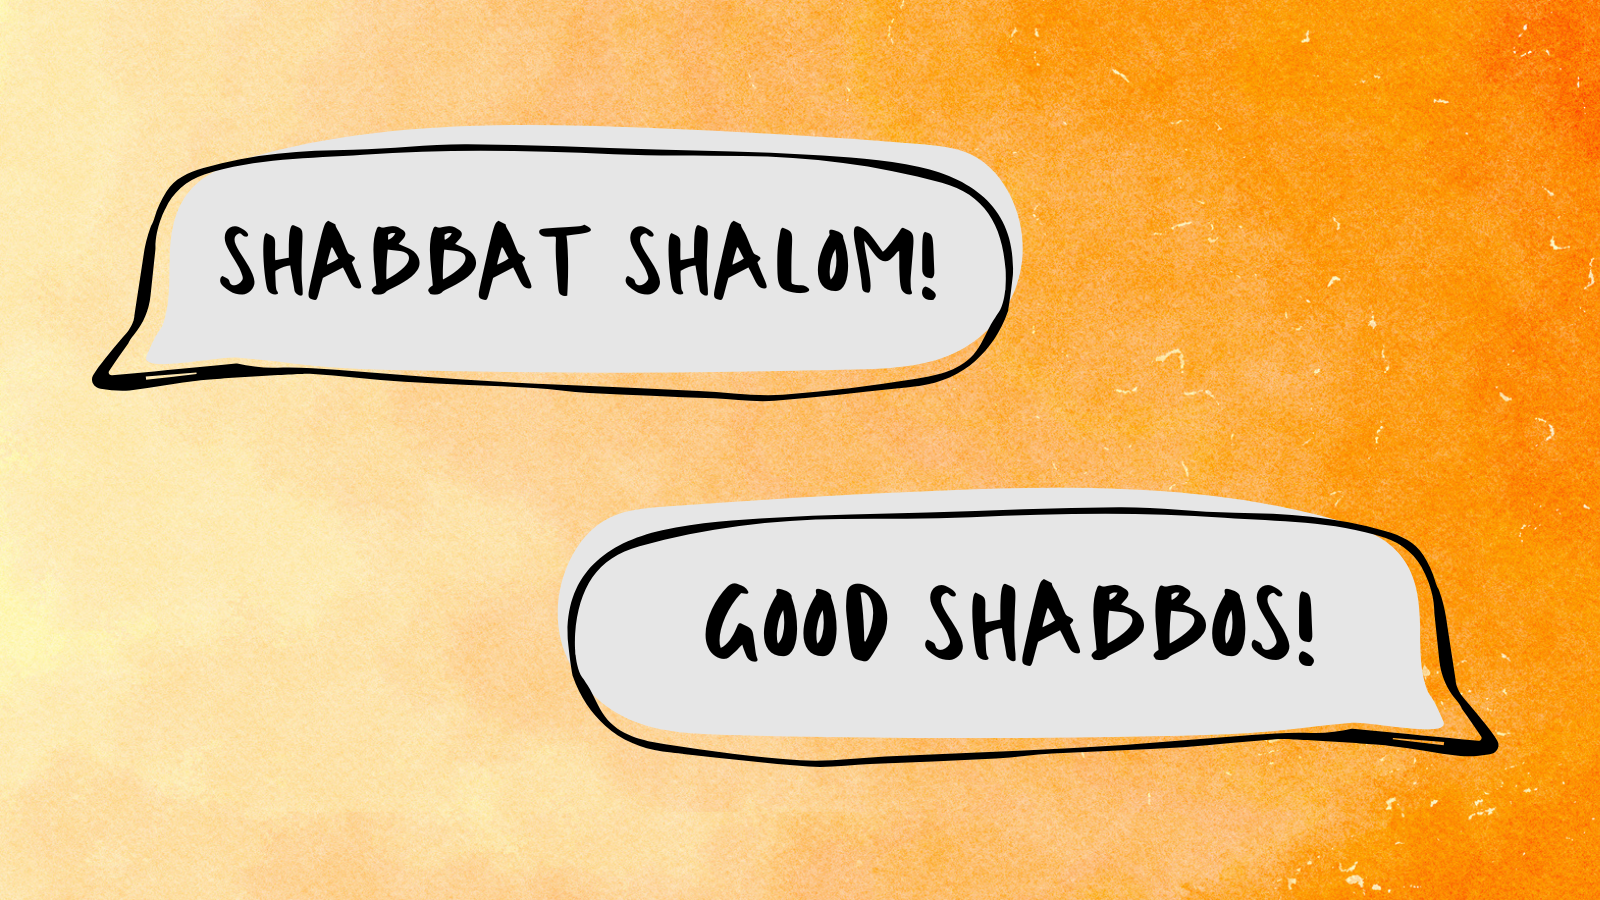 How to pronounce shalom